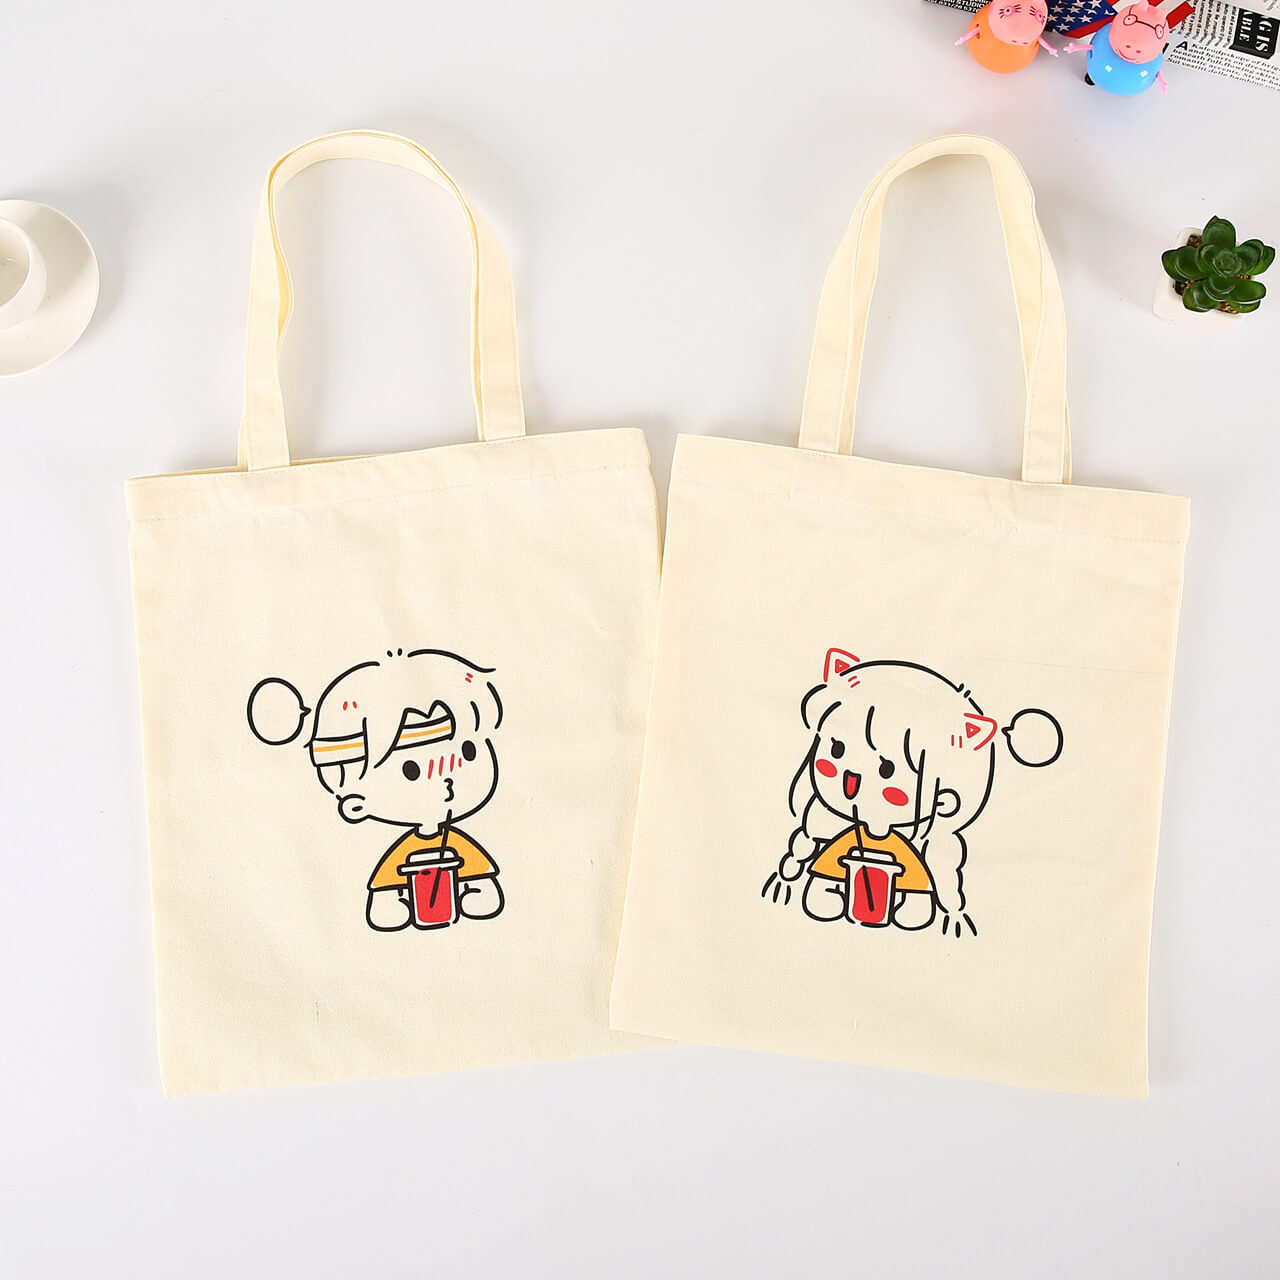 Animated figures are printed on canvas grocery bag